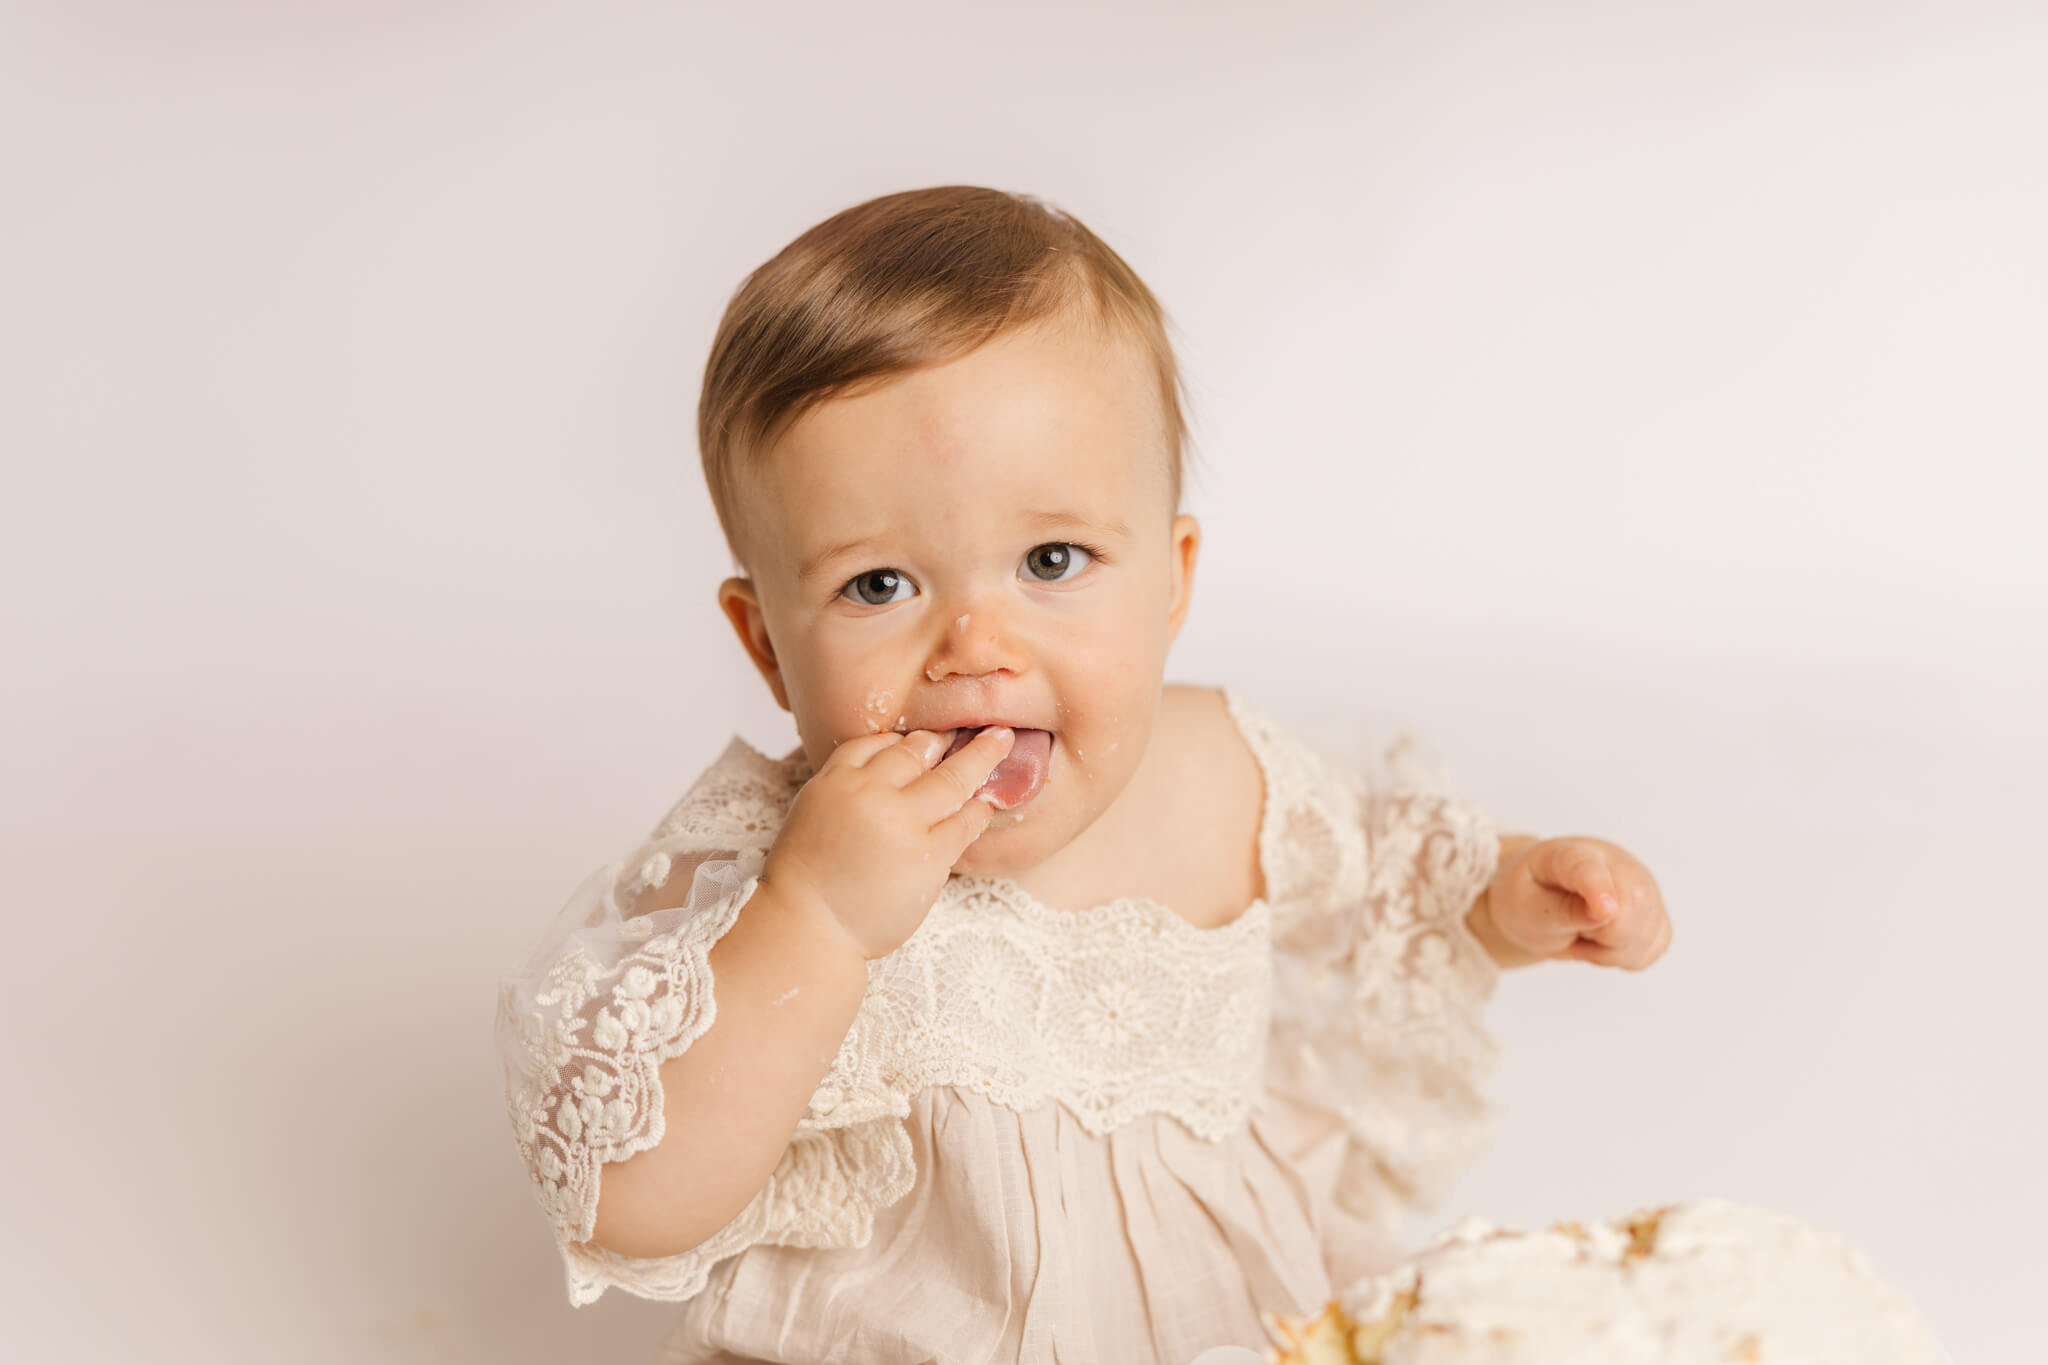 One year old girl in white lace dress at cake smash session.